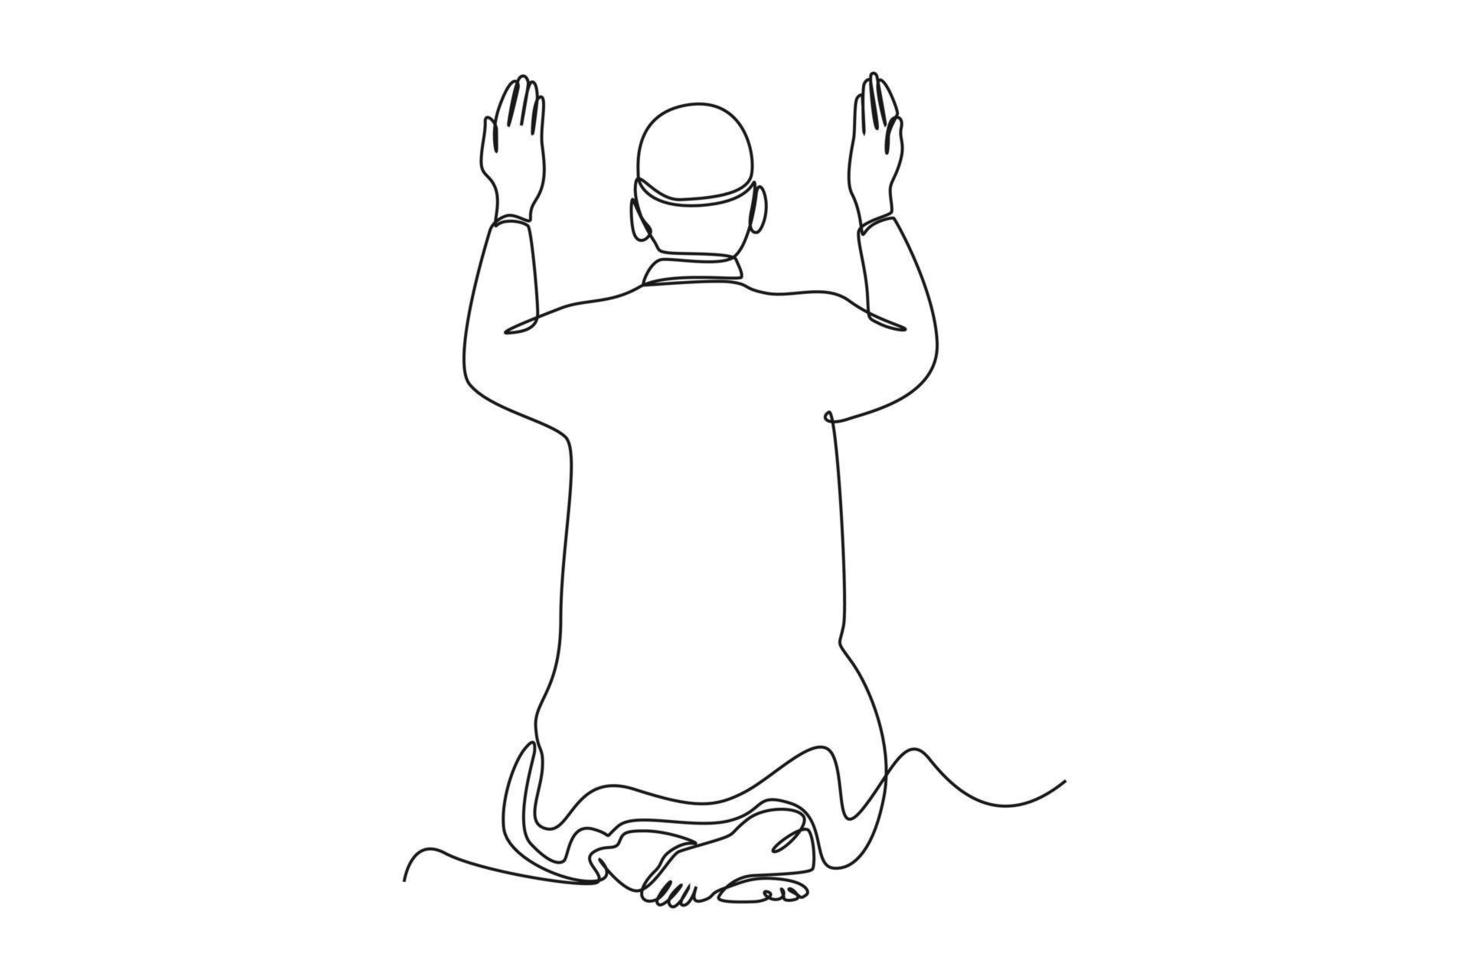 Continuous one line drawing muslim man raising hands for prayer. Eid al-Fitr concept. Single line draw design vector graphic illustration.